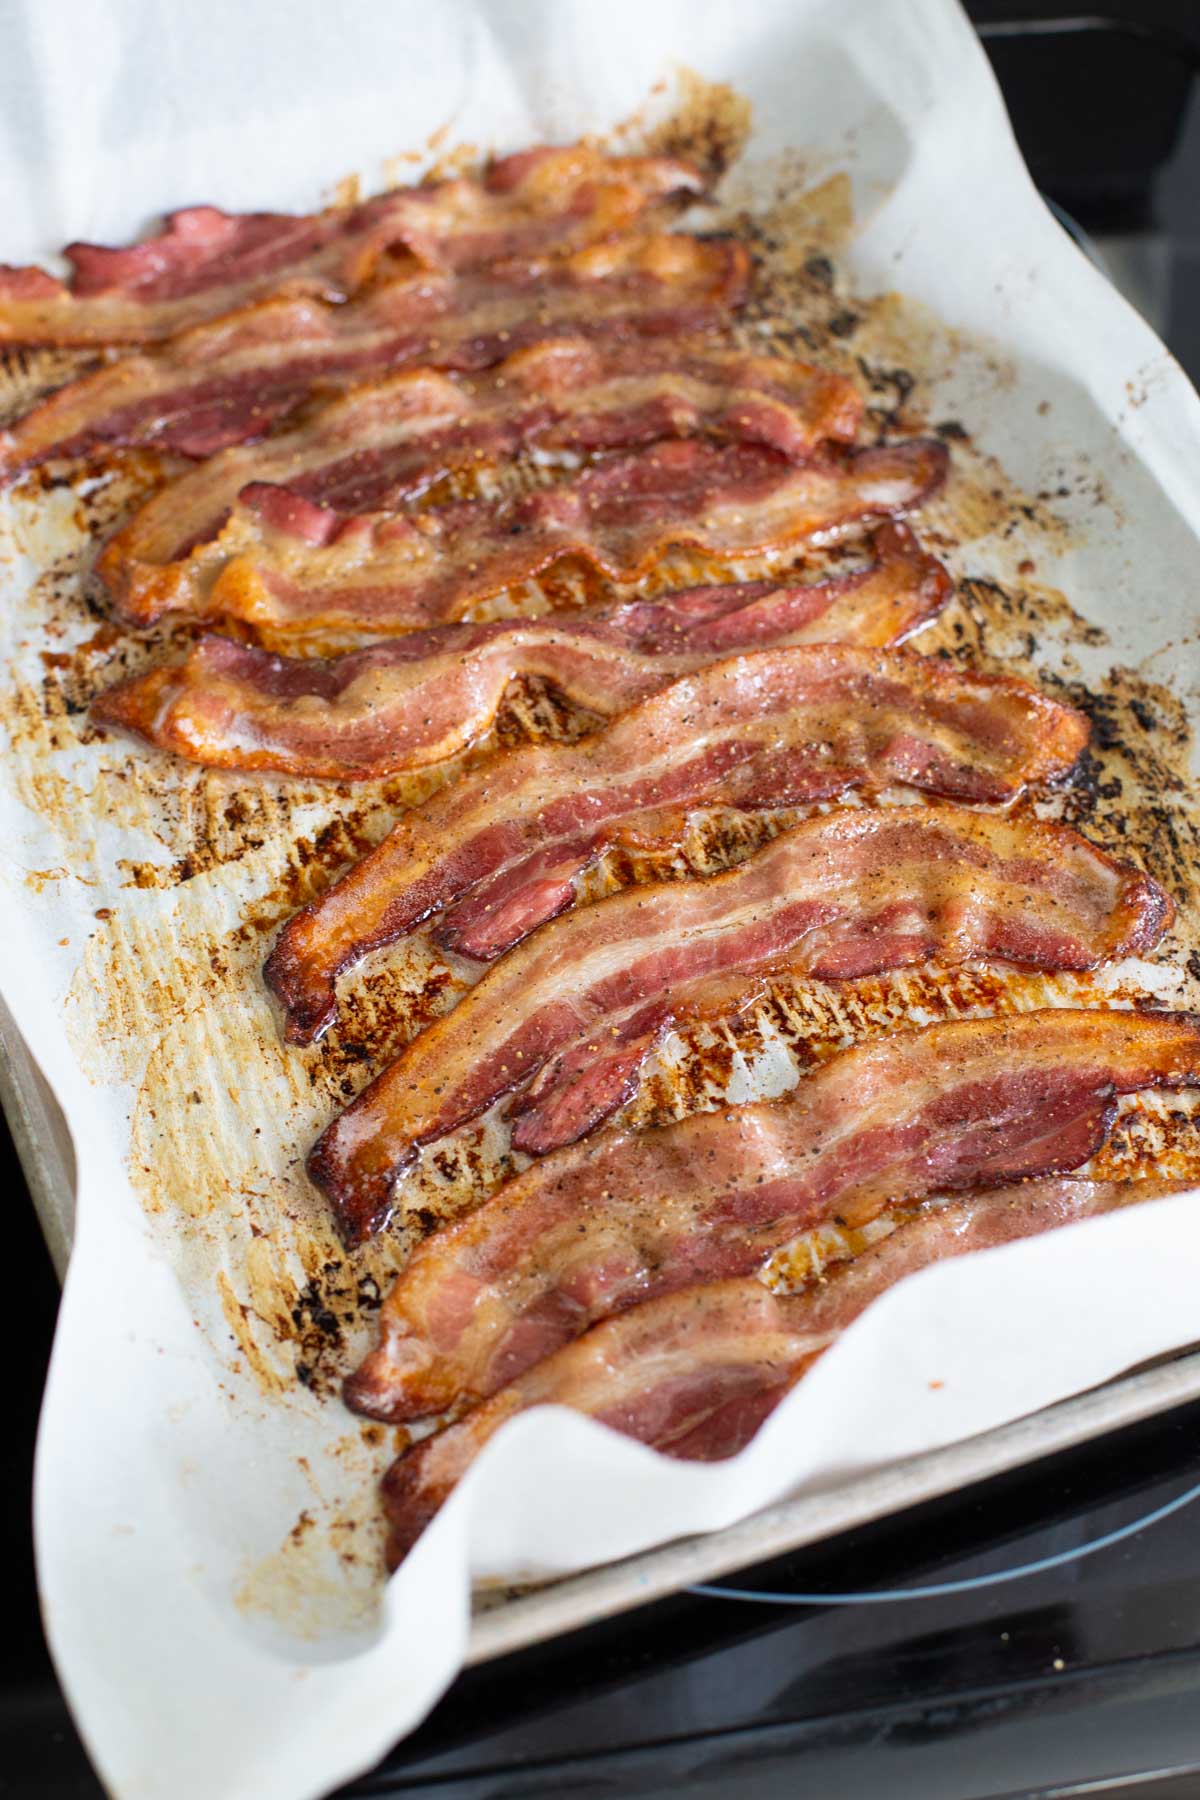 The bacon has been flipped, peppered, and is now crispy brown.